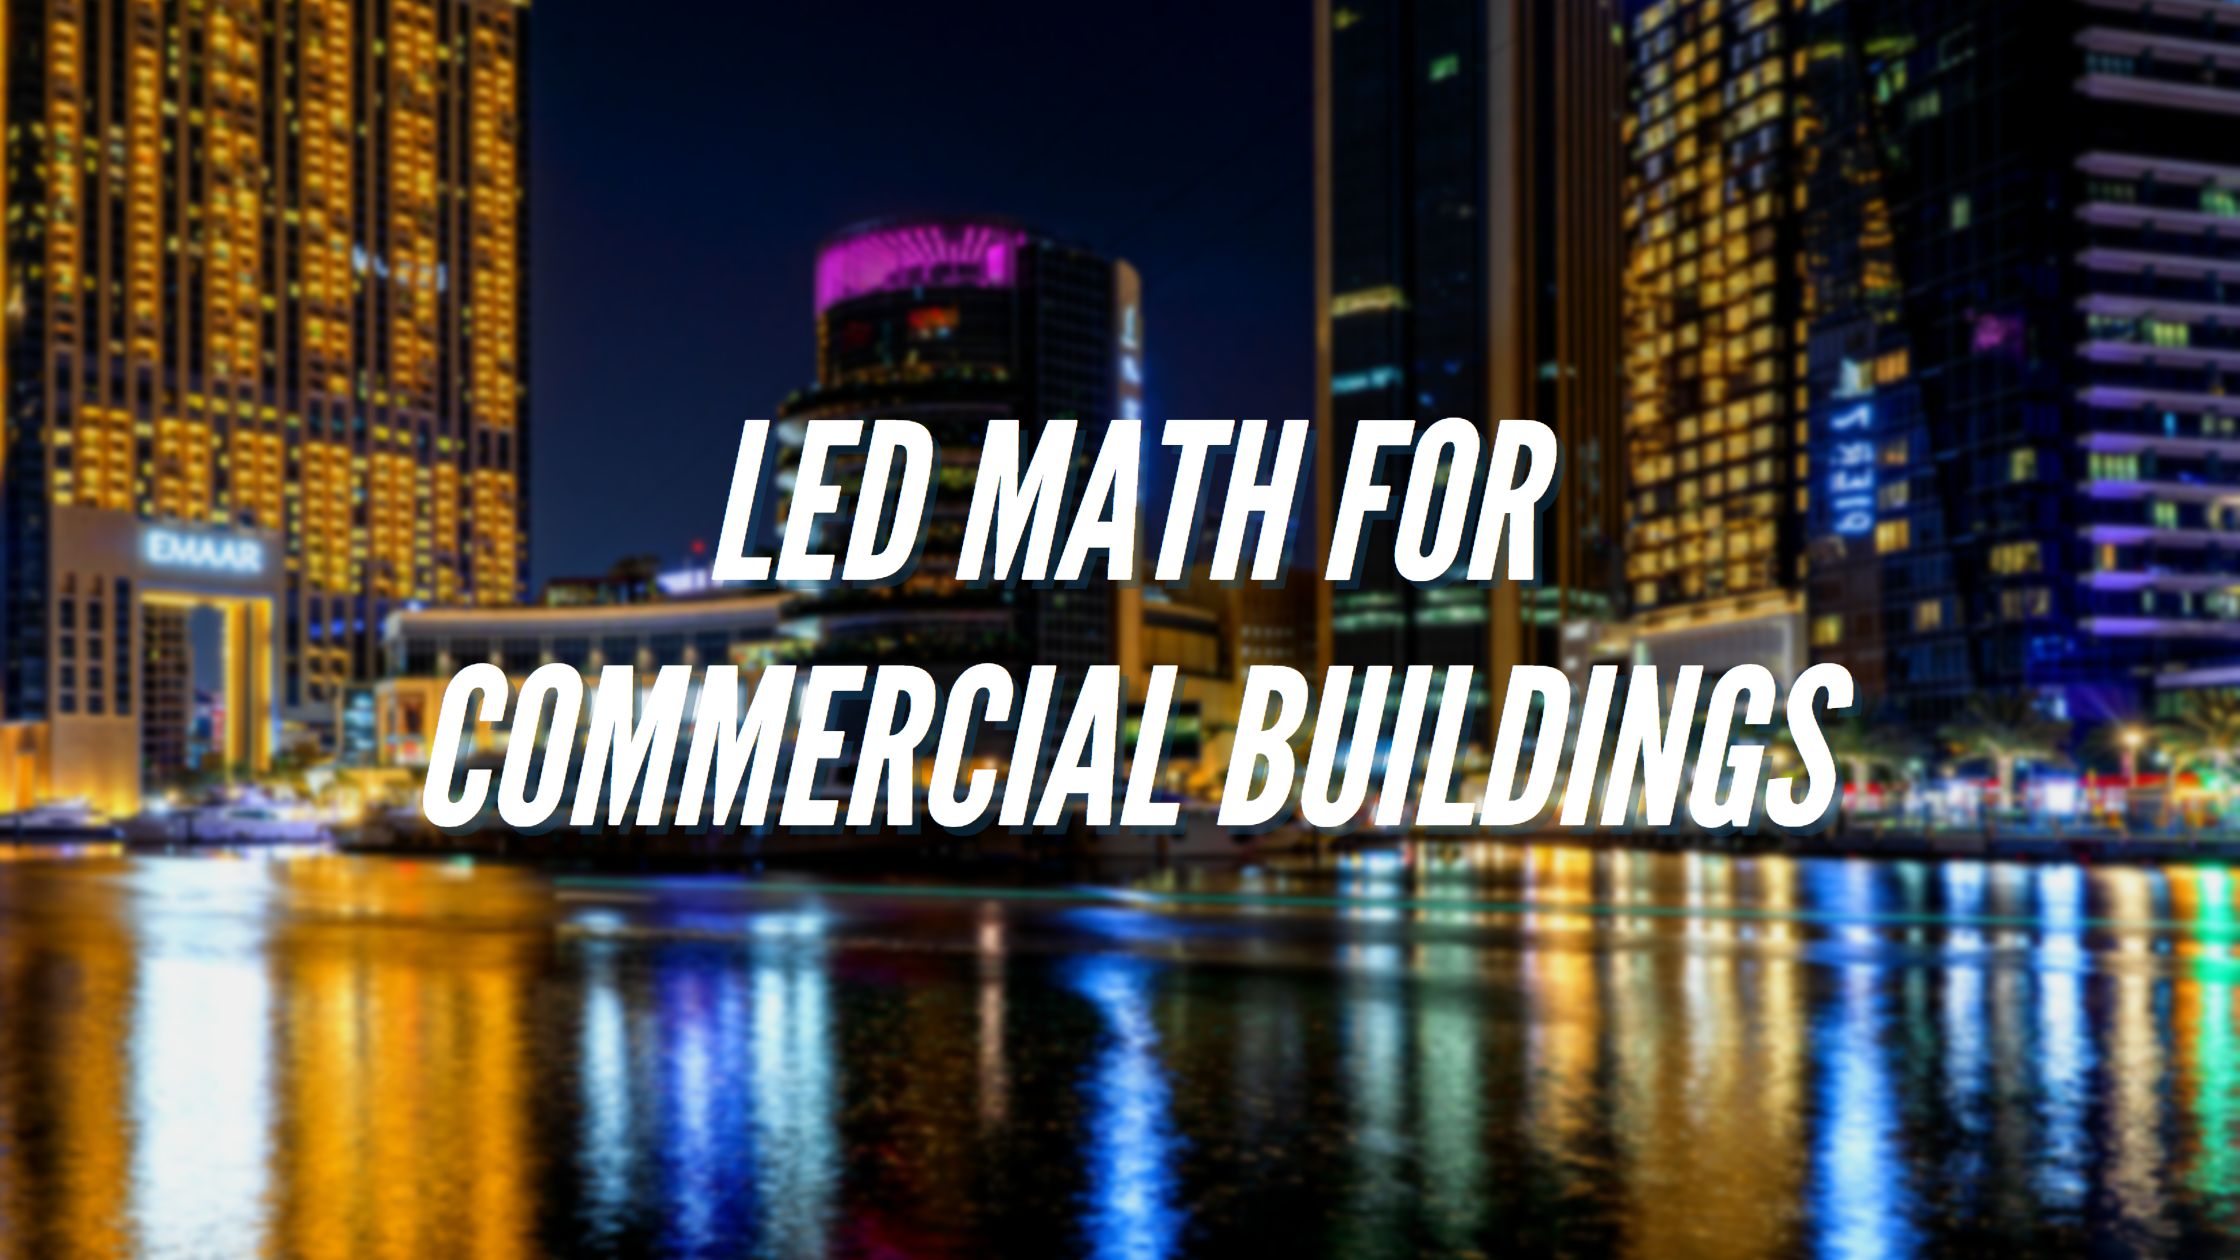 LED Math For Commercial Buildings